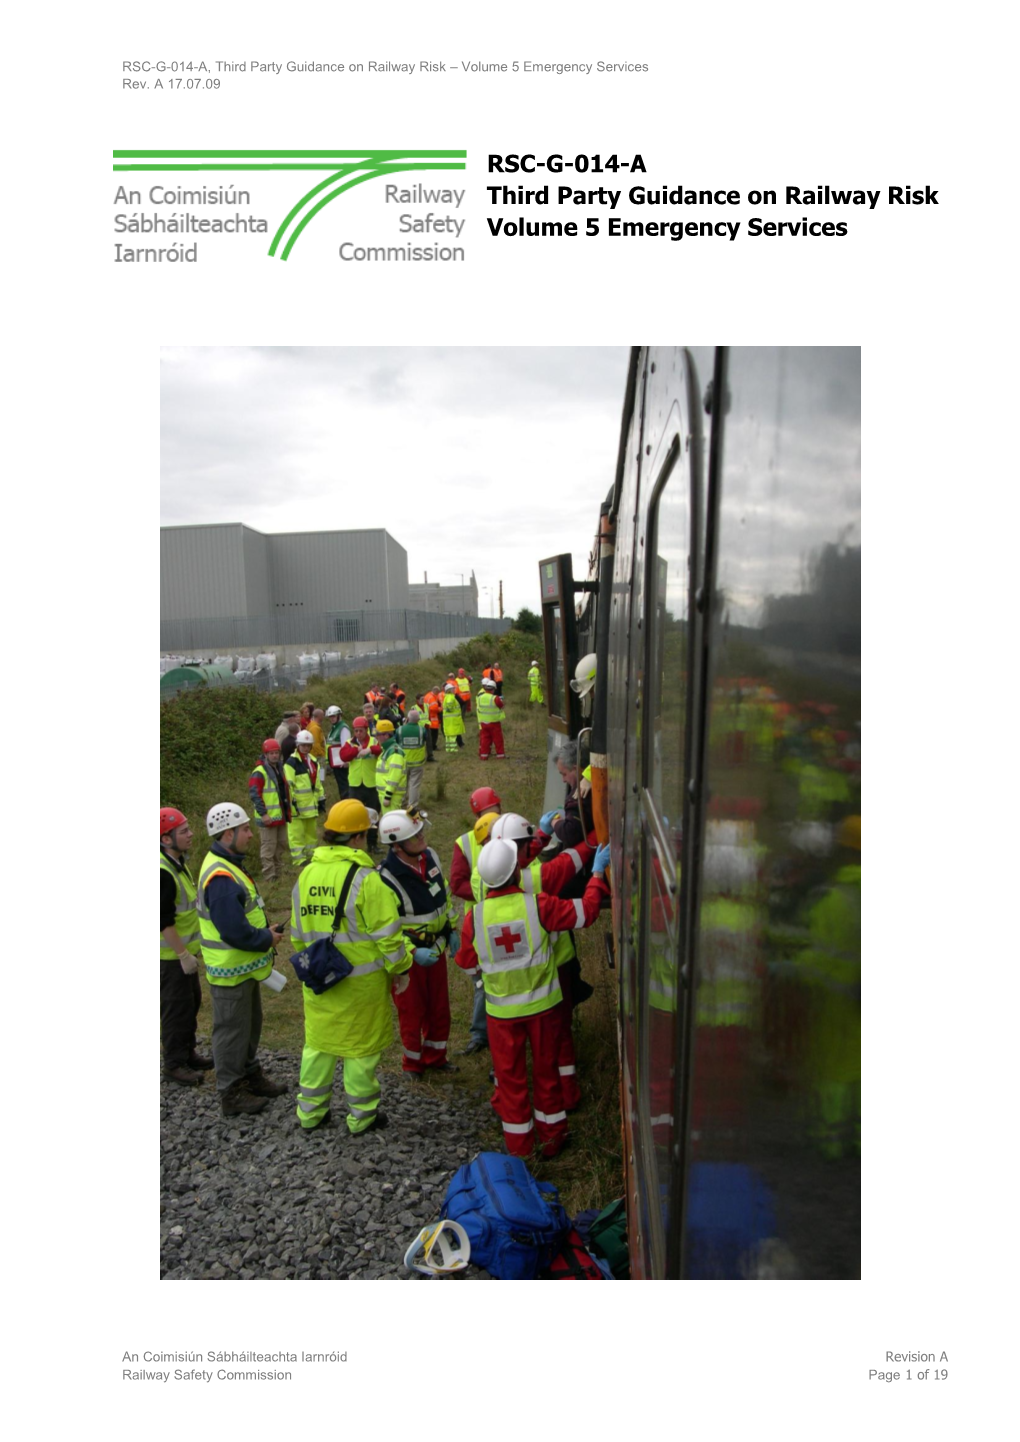 RSC-G-014-A, Third Party Guidance on Railway Risk – Volume 5 Emergency Services Rev